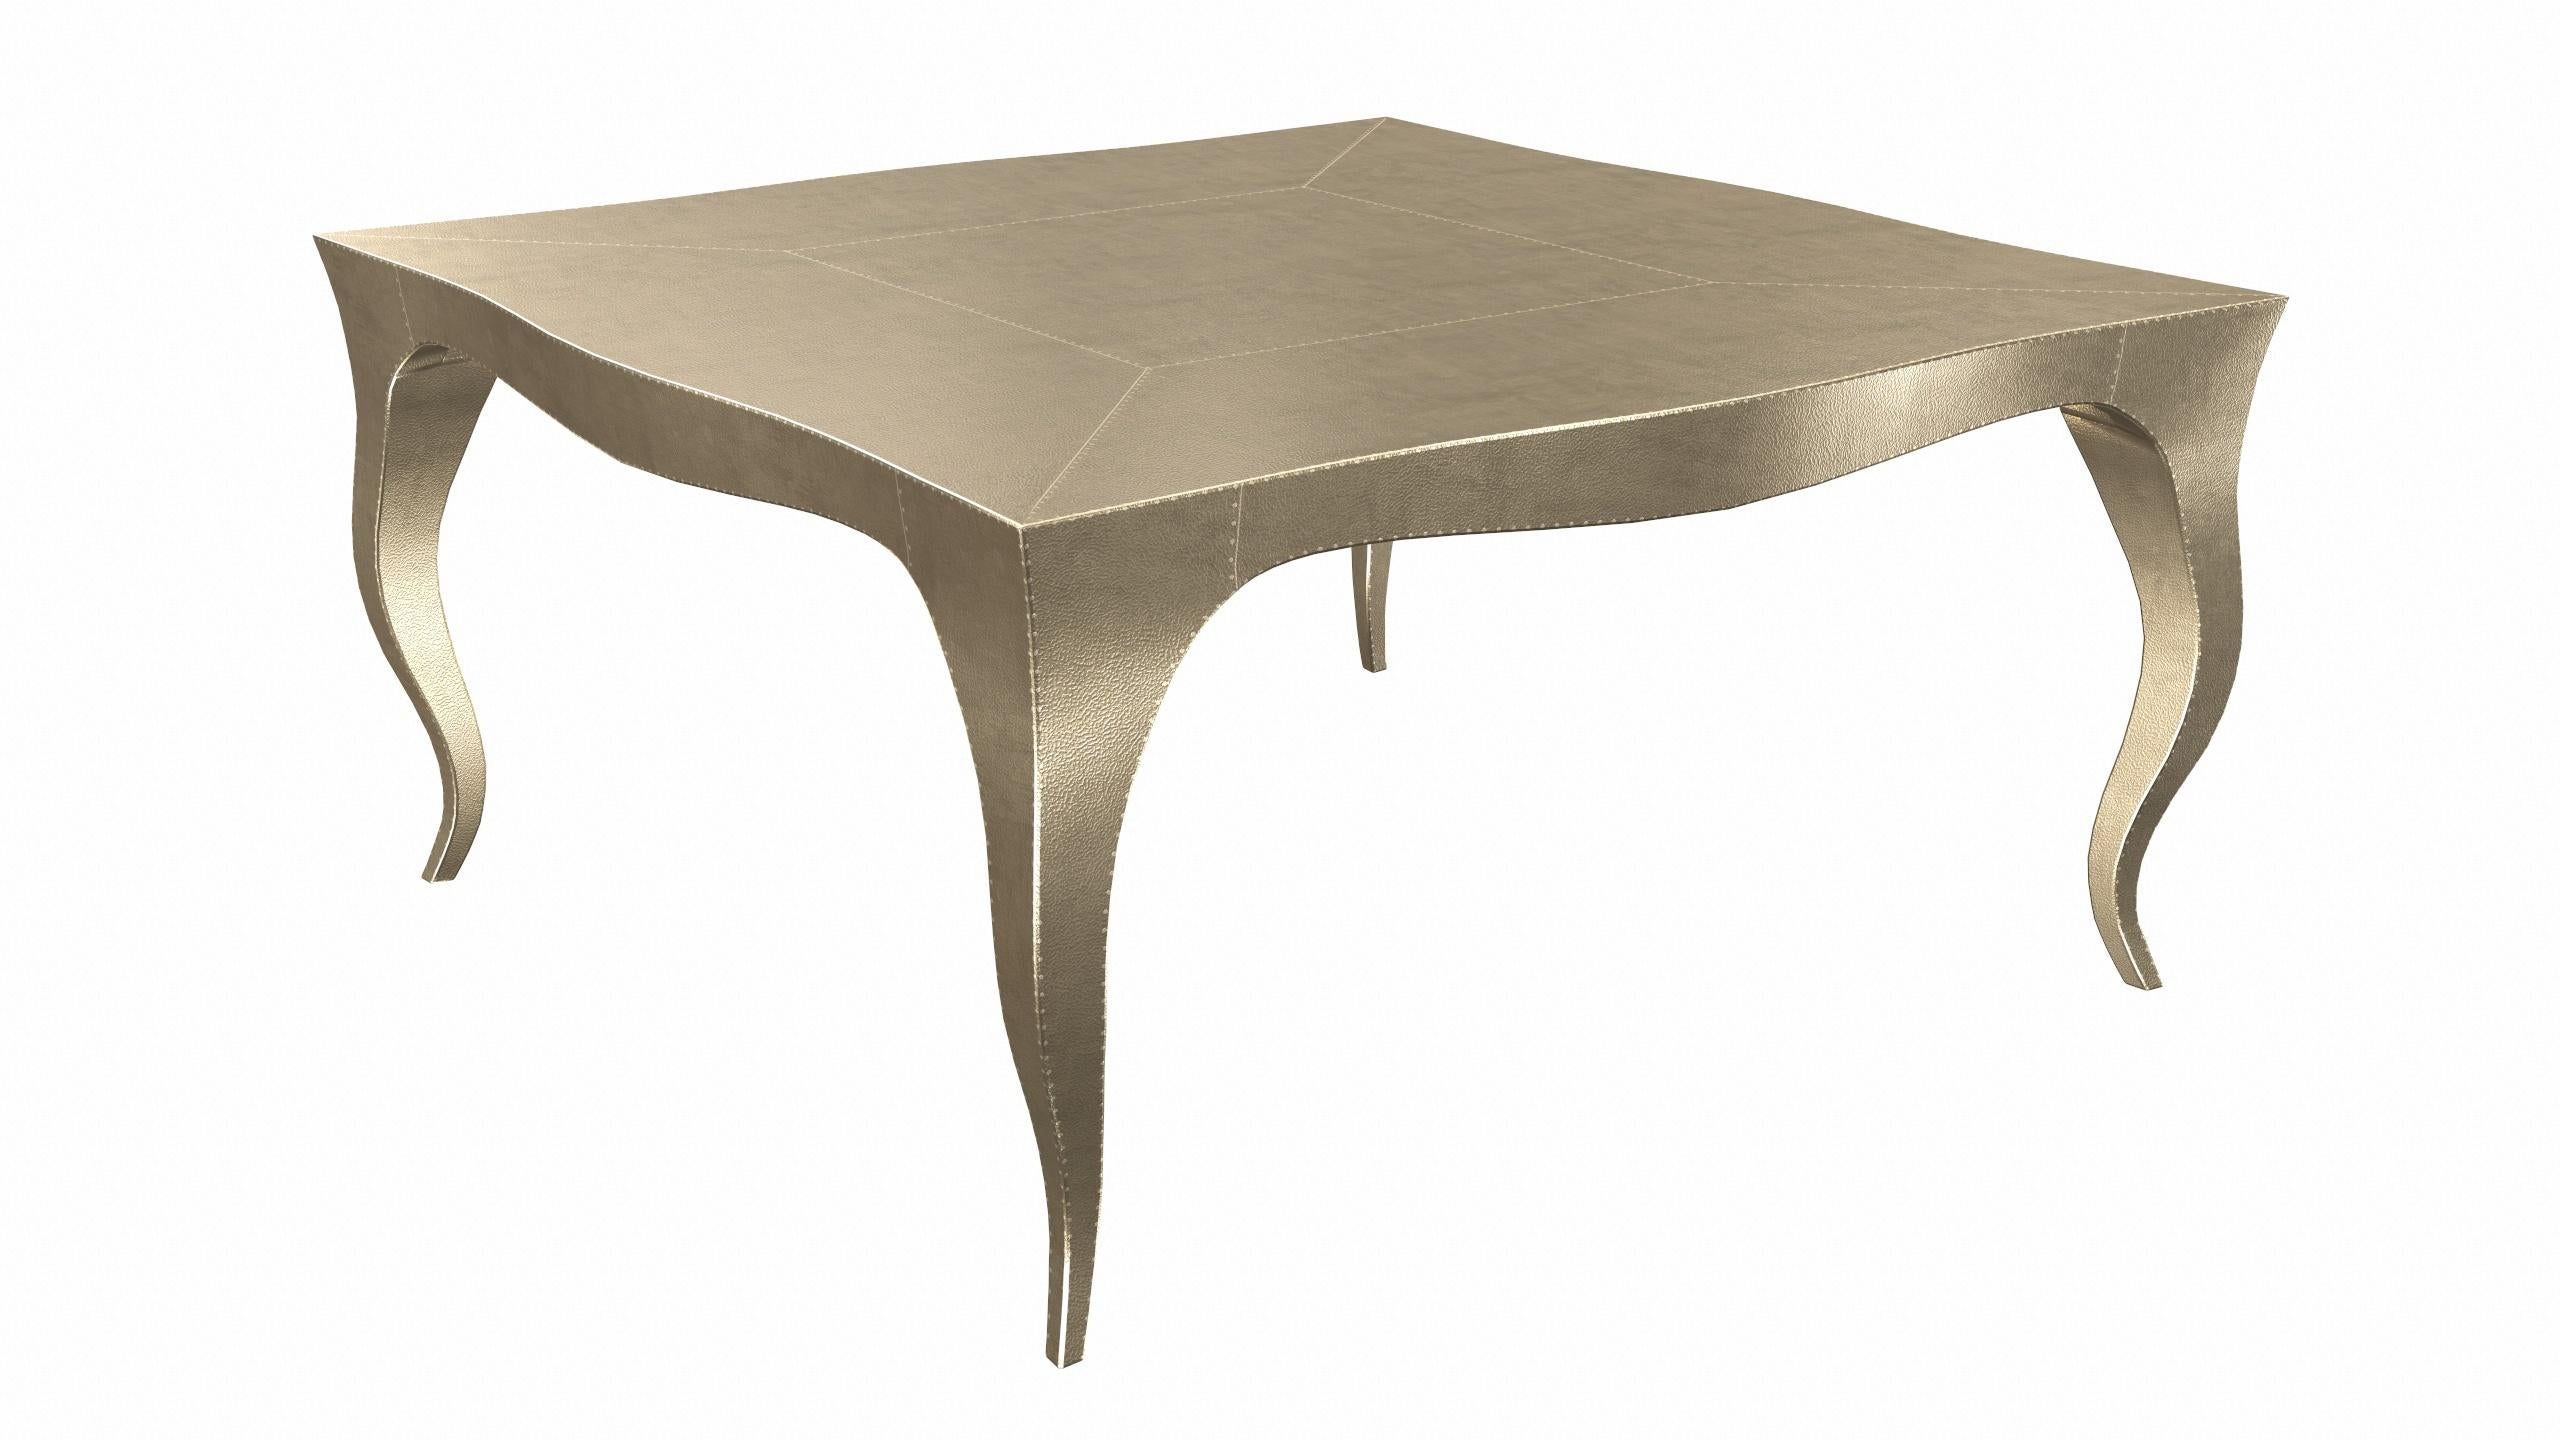 Contemporary Louise Art Deco Game Tables Fine Hammered Brass 18.5x18.5x10 inch by P. Mathieu For Sale